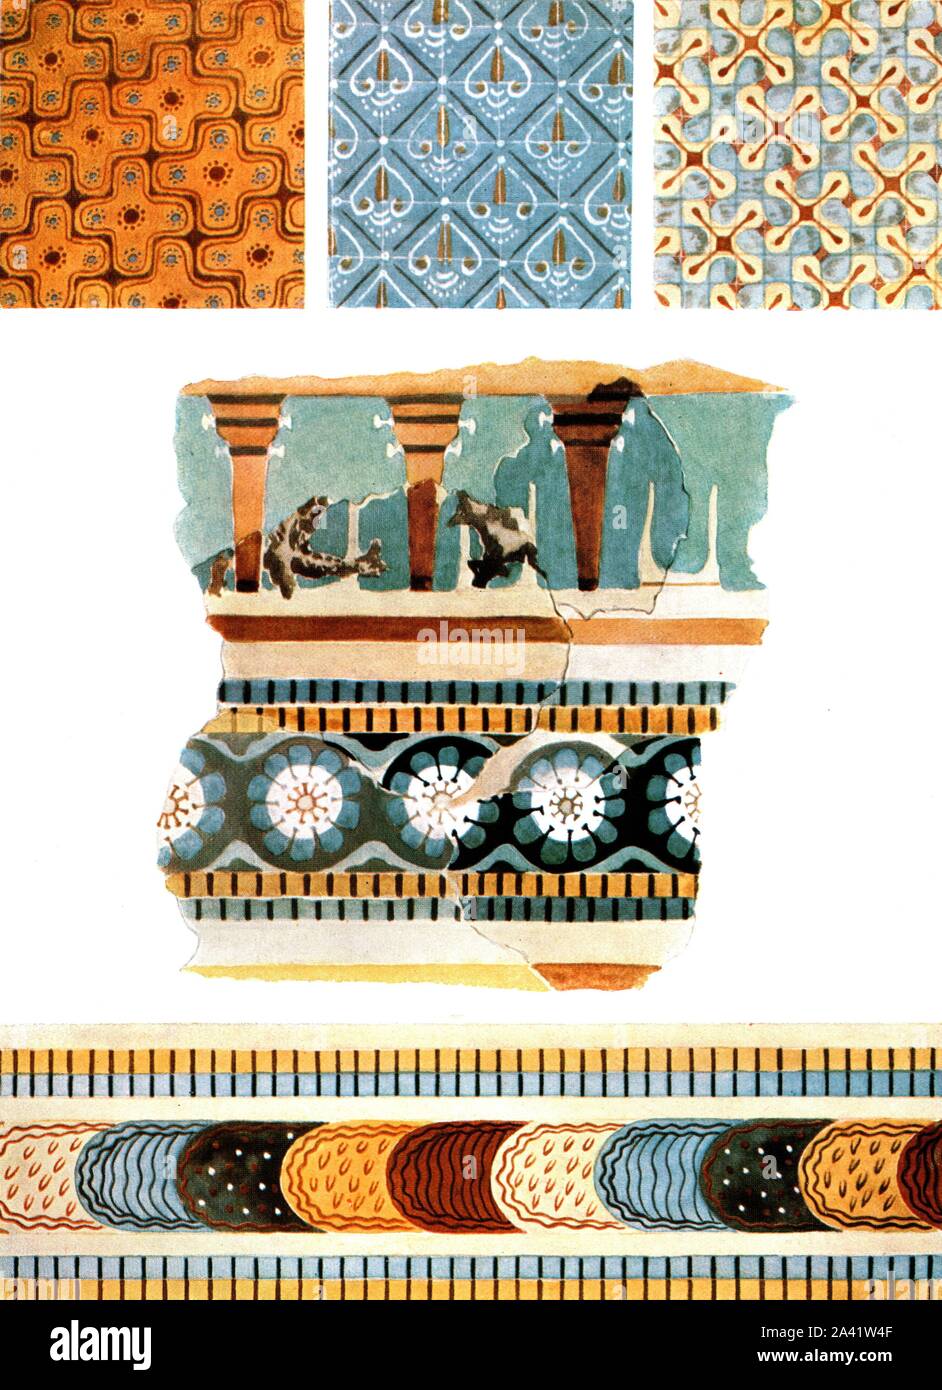 Textile patterns and fresco fragments from Crete, Greece, (1928). '1700-1400 B.C...Two textile patterns from the Procession Fresco at Cnossos [Knossos], about 1550-1400 B.C. Textile pattern of a fresco at Hagia Triada, about 1700-1600 B.C.', after watercolours by &#xc9;mile Gilli&#xe9;ron. 'Fresco fragment showing columns from Cnossos, about 1700-1550 B.C. Ornament from the fresco representation of scenes of the bull-ring from Cnossos, about 1550 B.C.', after a watercolour by &#xc9;mile Gilli&#xe9;ron. Plate XVI, figs 44-48, from &quot;An Encyclopaedia of Colour Decoration from the Earliest Ti Stock Photo